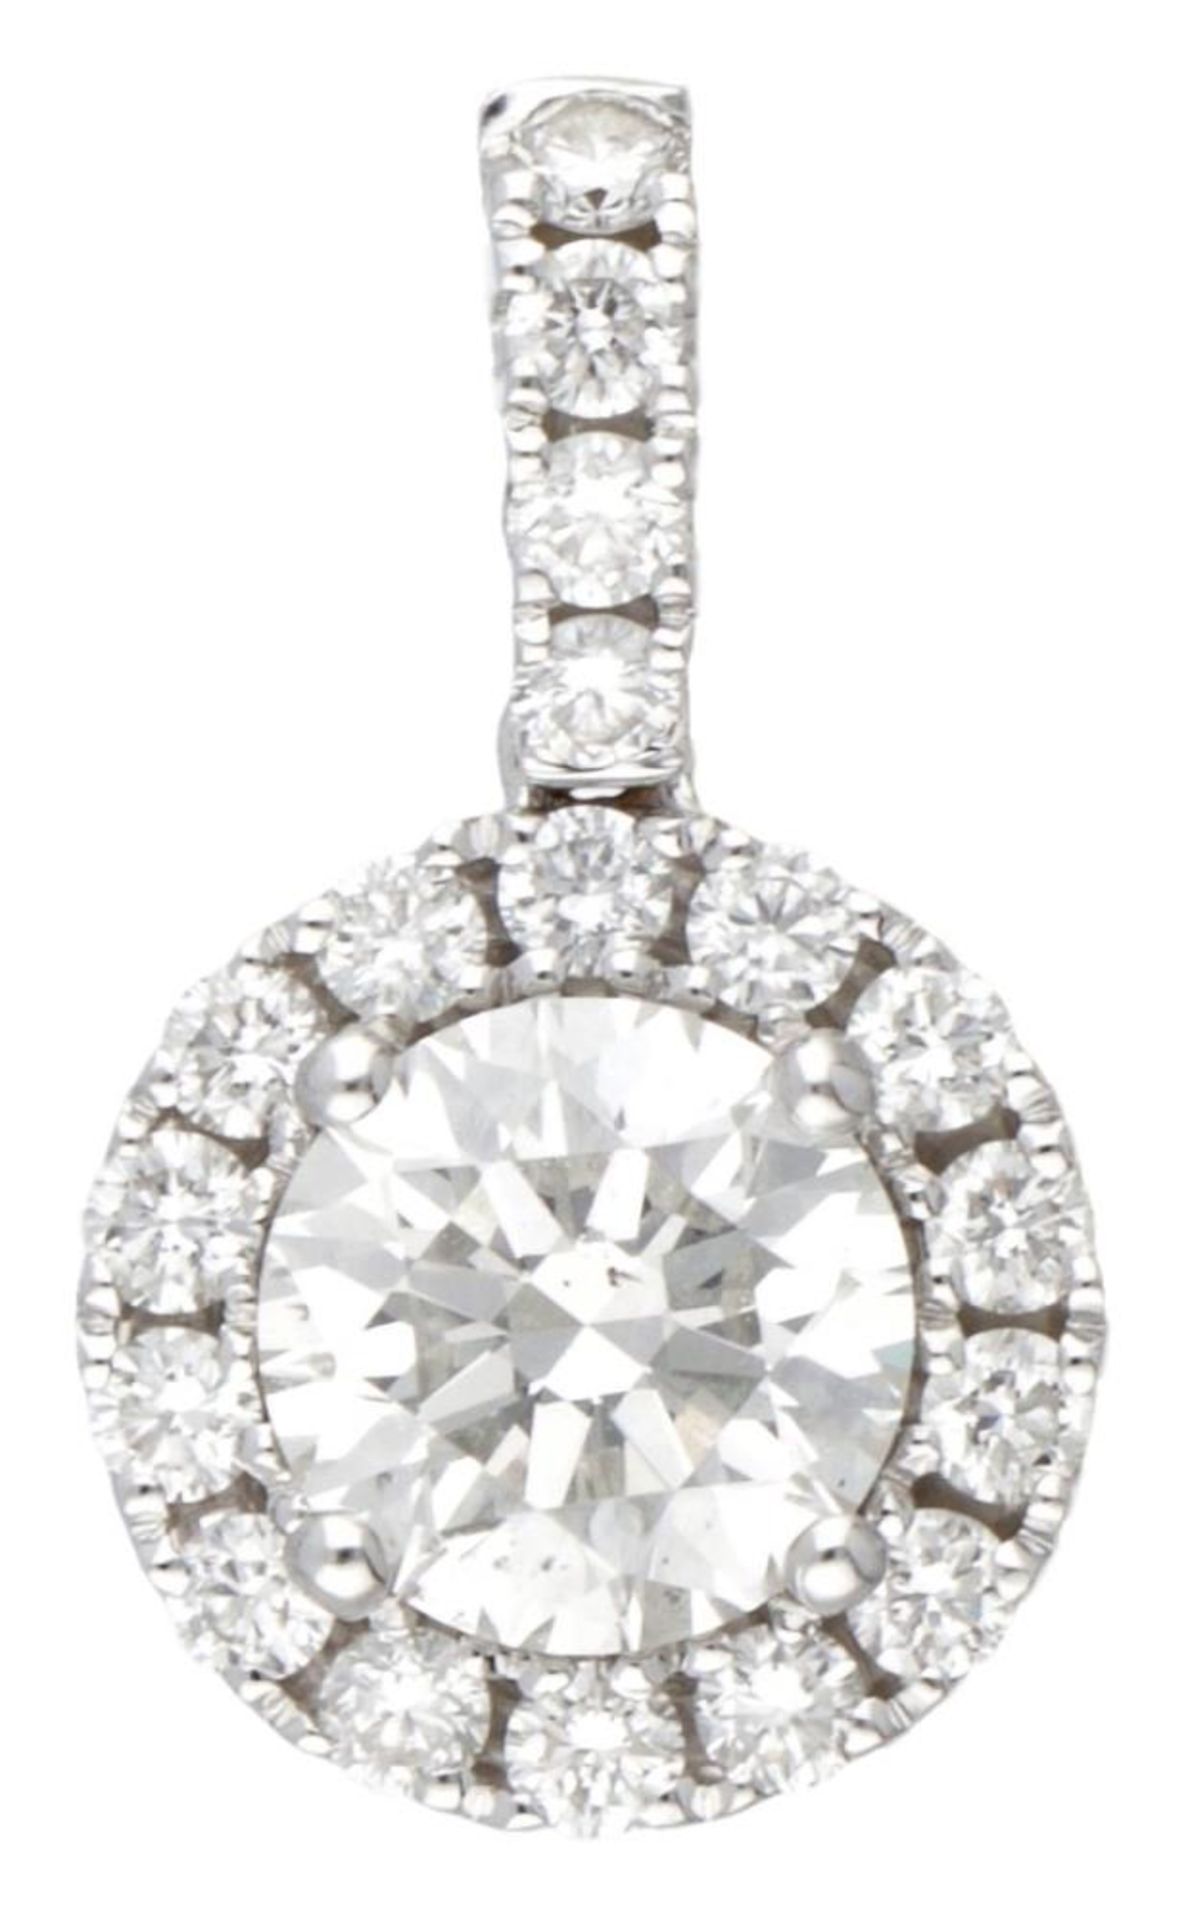 18K. White gold halo pendant set with approx. 1.00 ct. diamond.